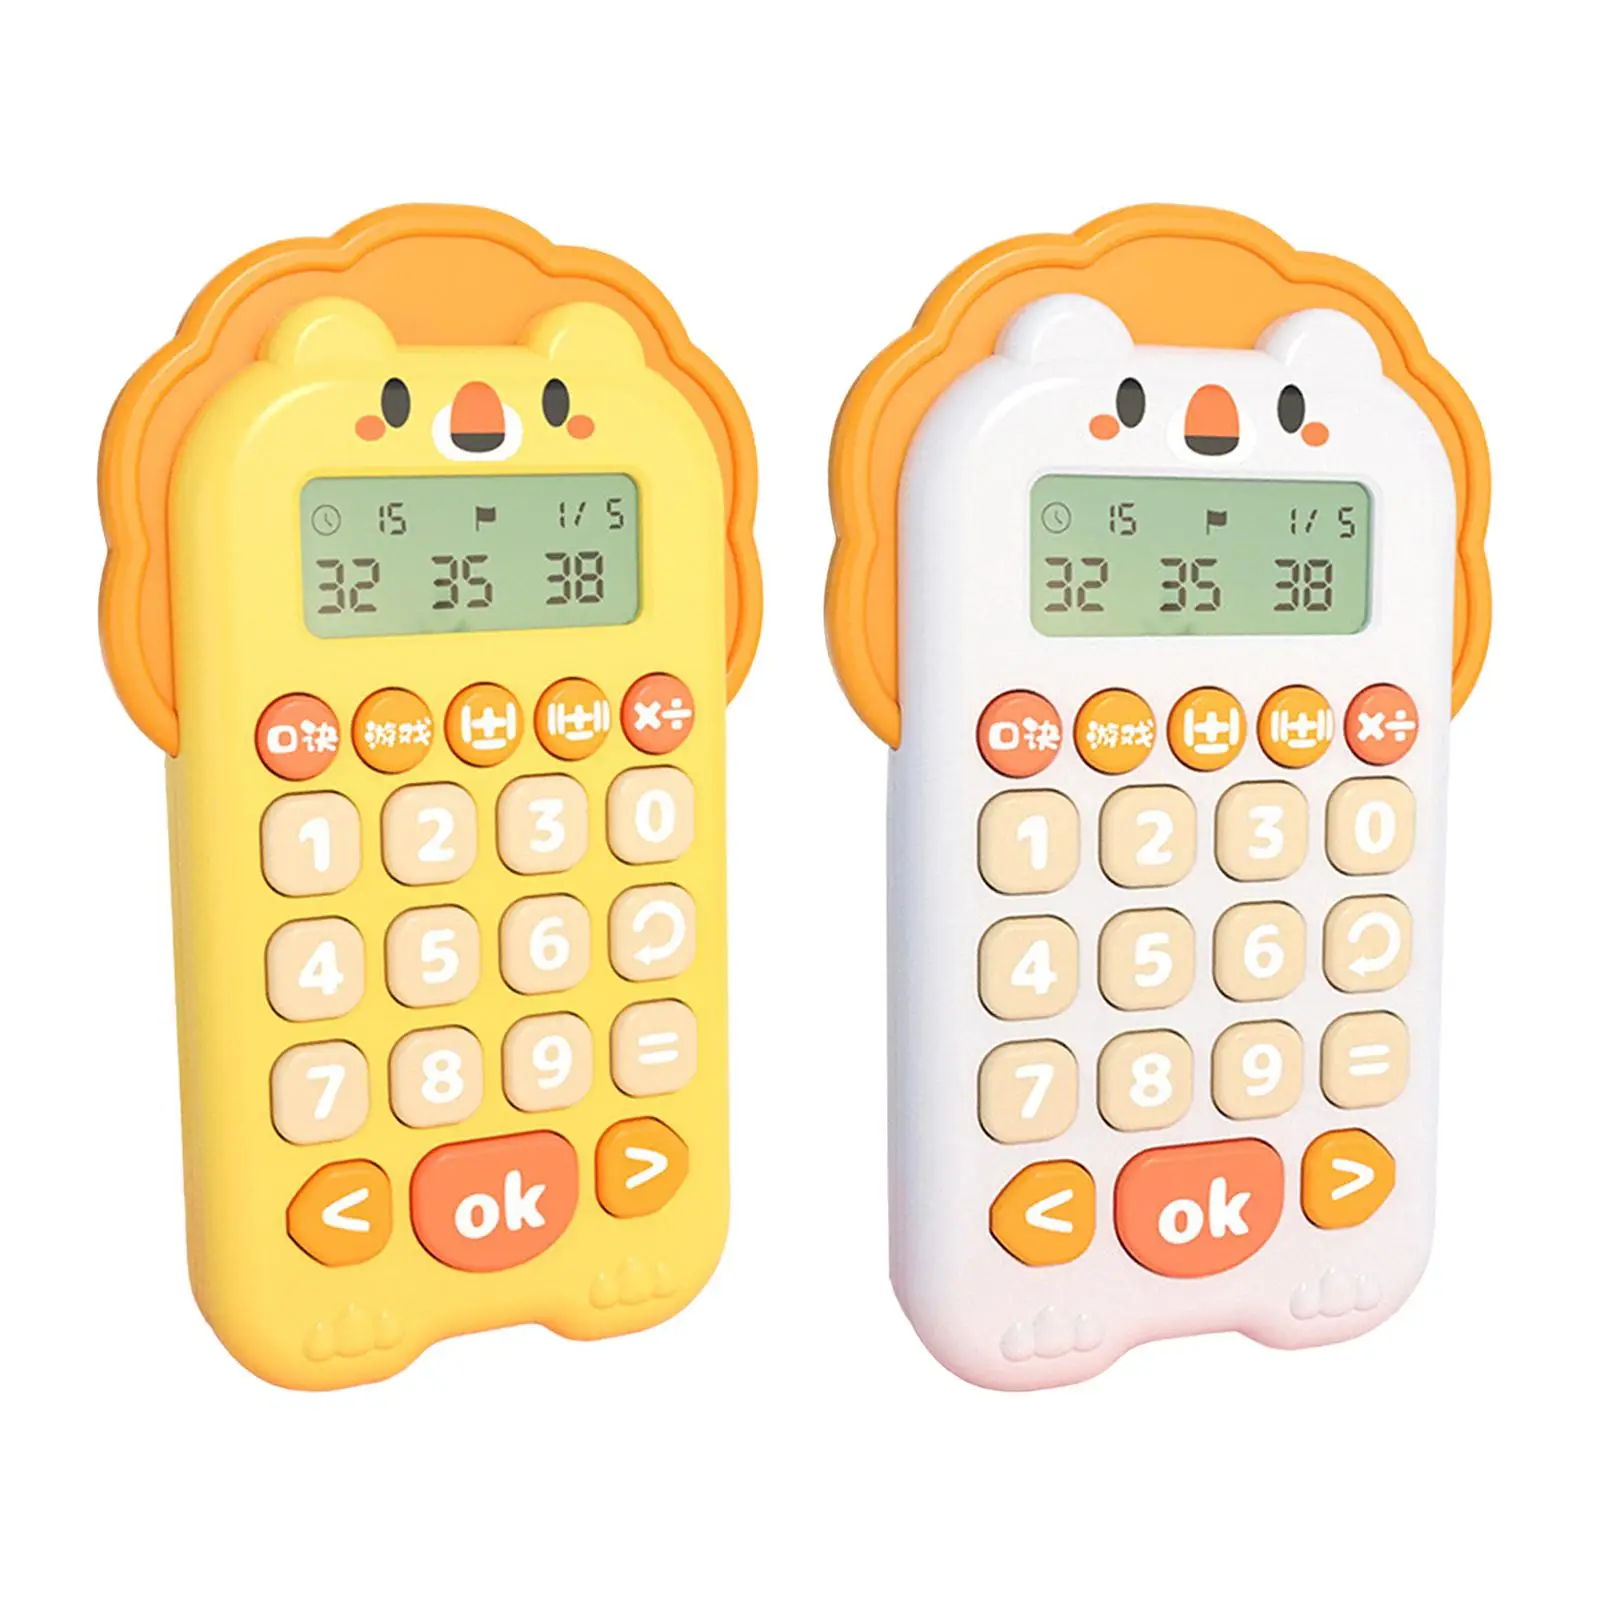 Functional Calculators 10 Digit Addition Subtraction Multiplication Division